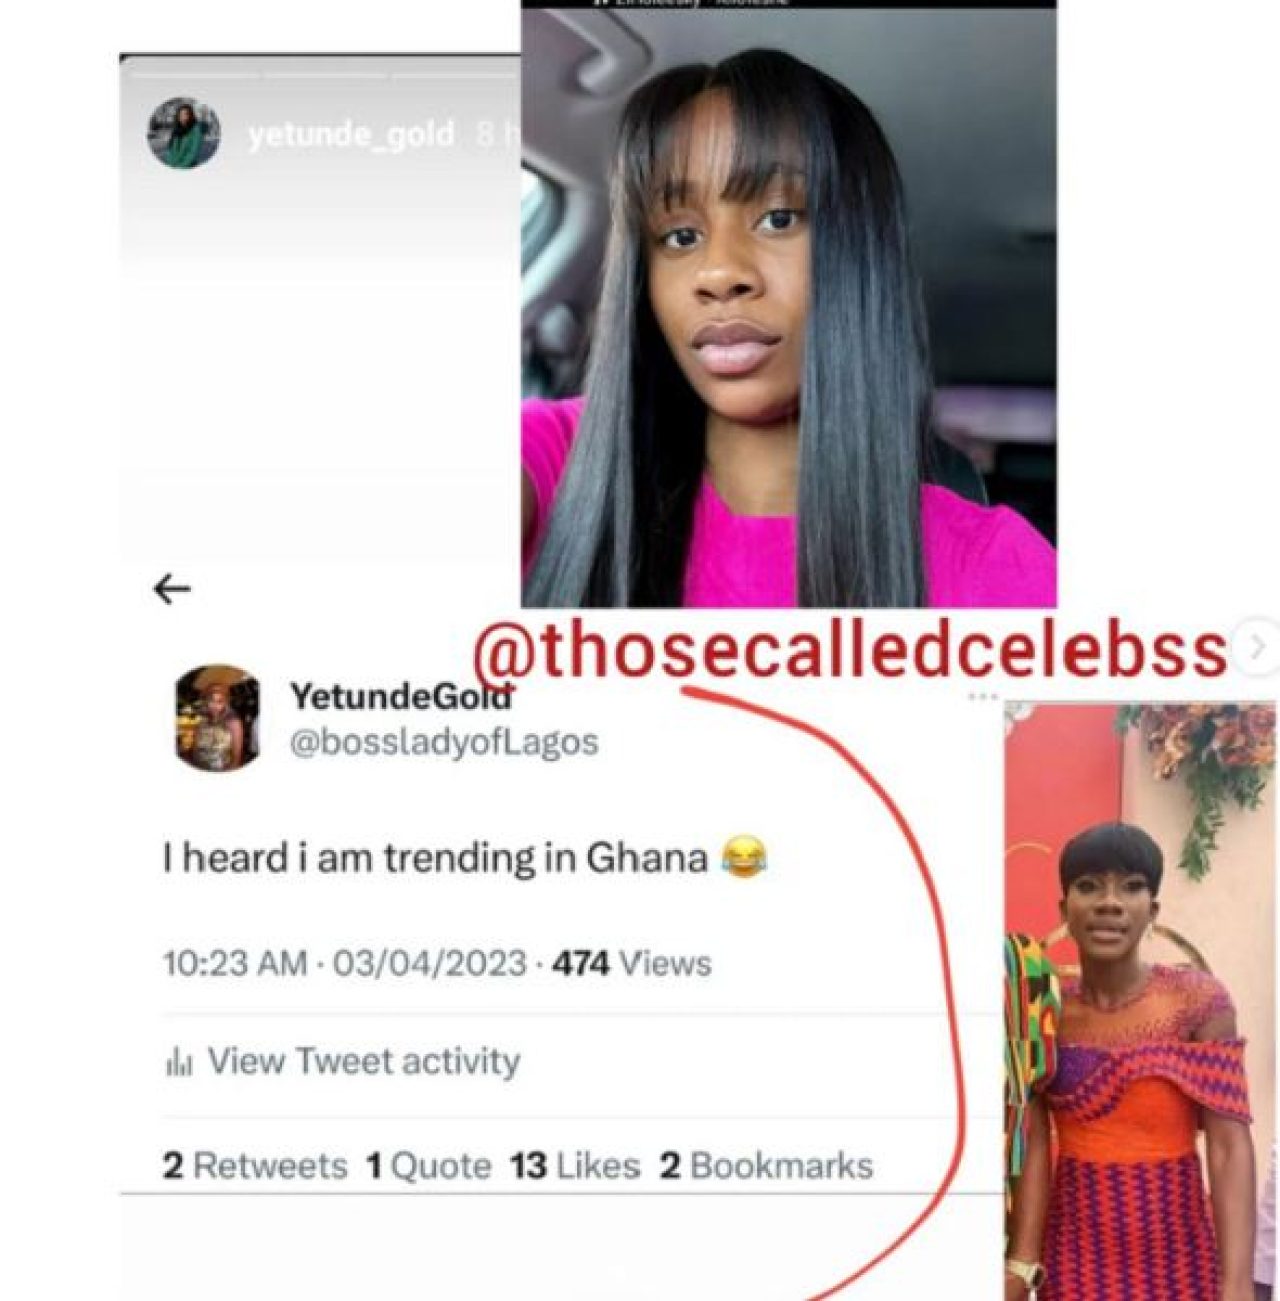 "That is not me in Jesus name" - Nigerian Actress Reacts To Being Mistaken For Harold Amenyah’s Wife AdvertAfrica News on afronewswire.com: Amplifying Africa's Voice | afronewswire.com | Breaking News & Stories